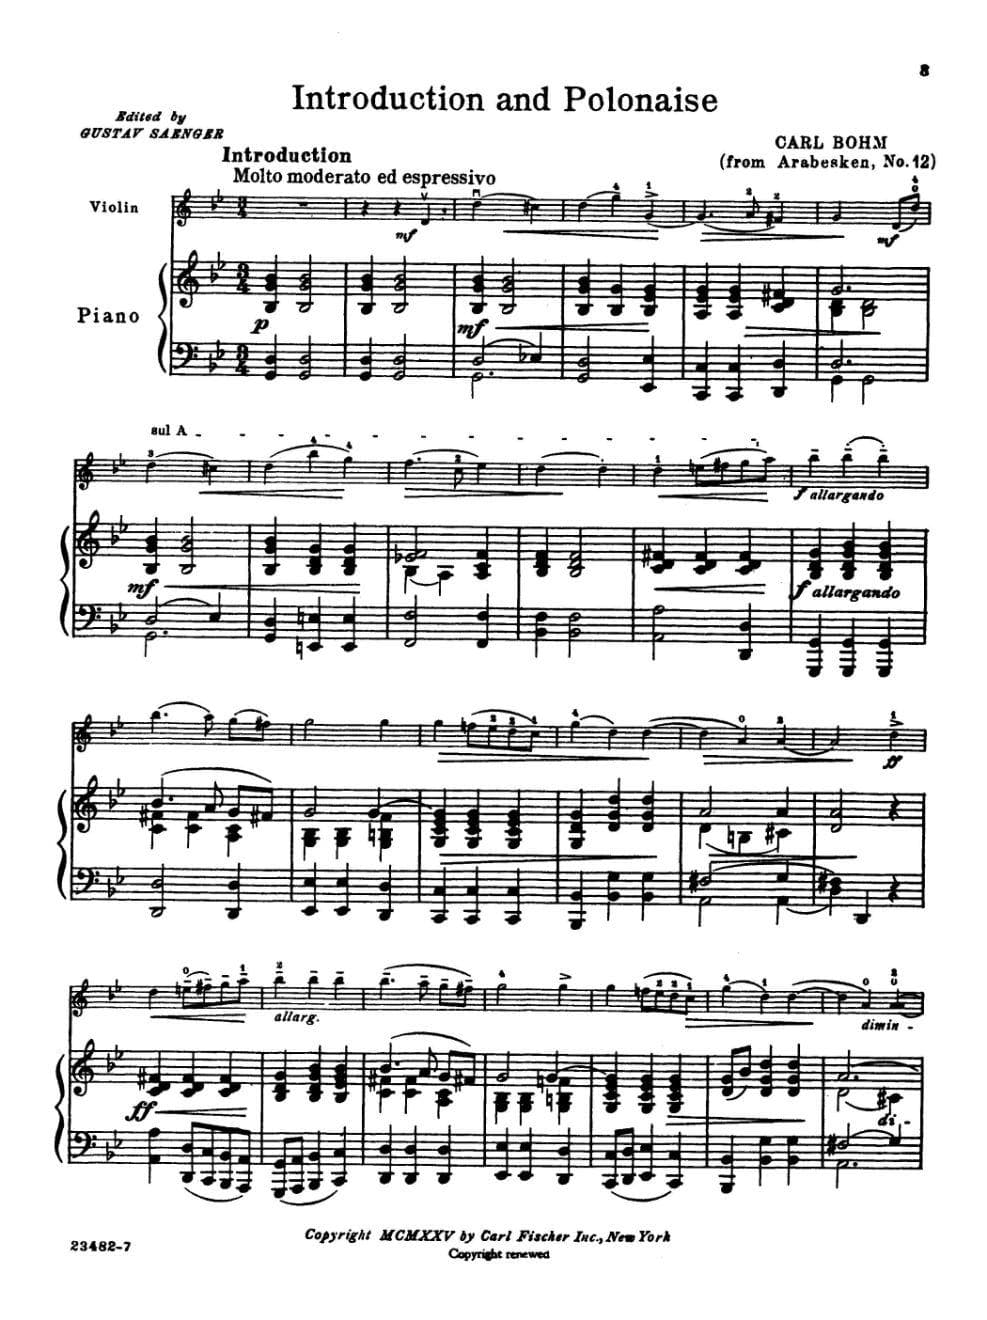 Bohm's Moto Perpetuo from Suite III, free download